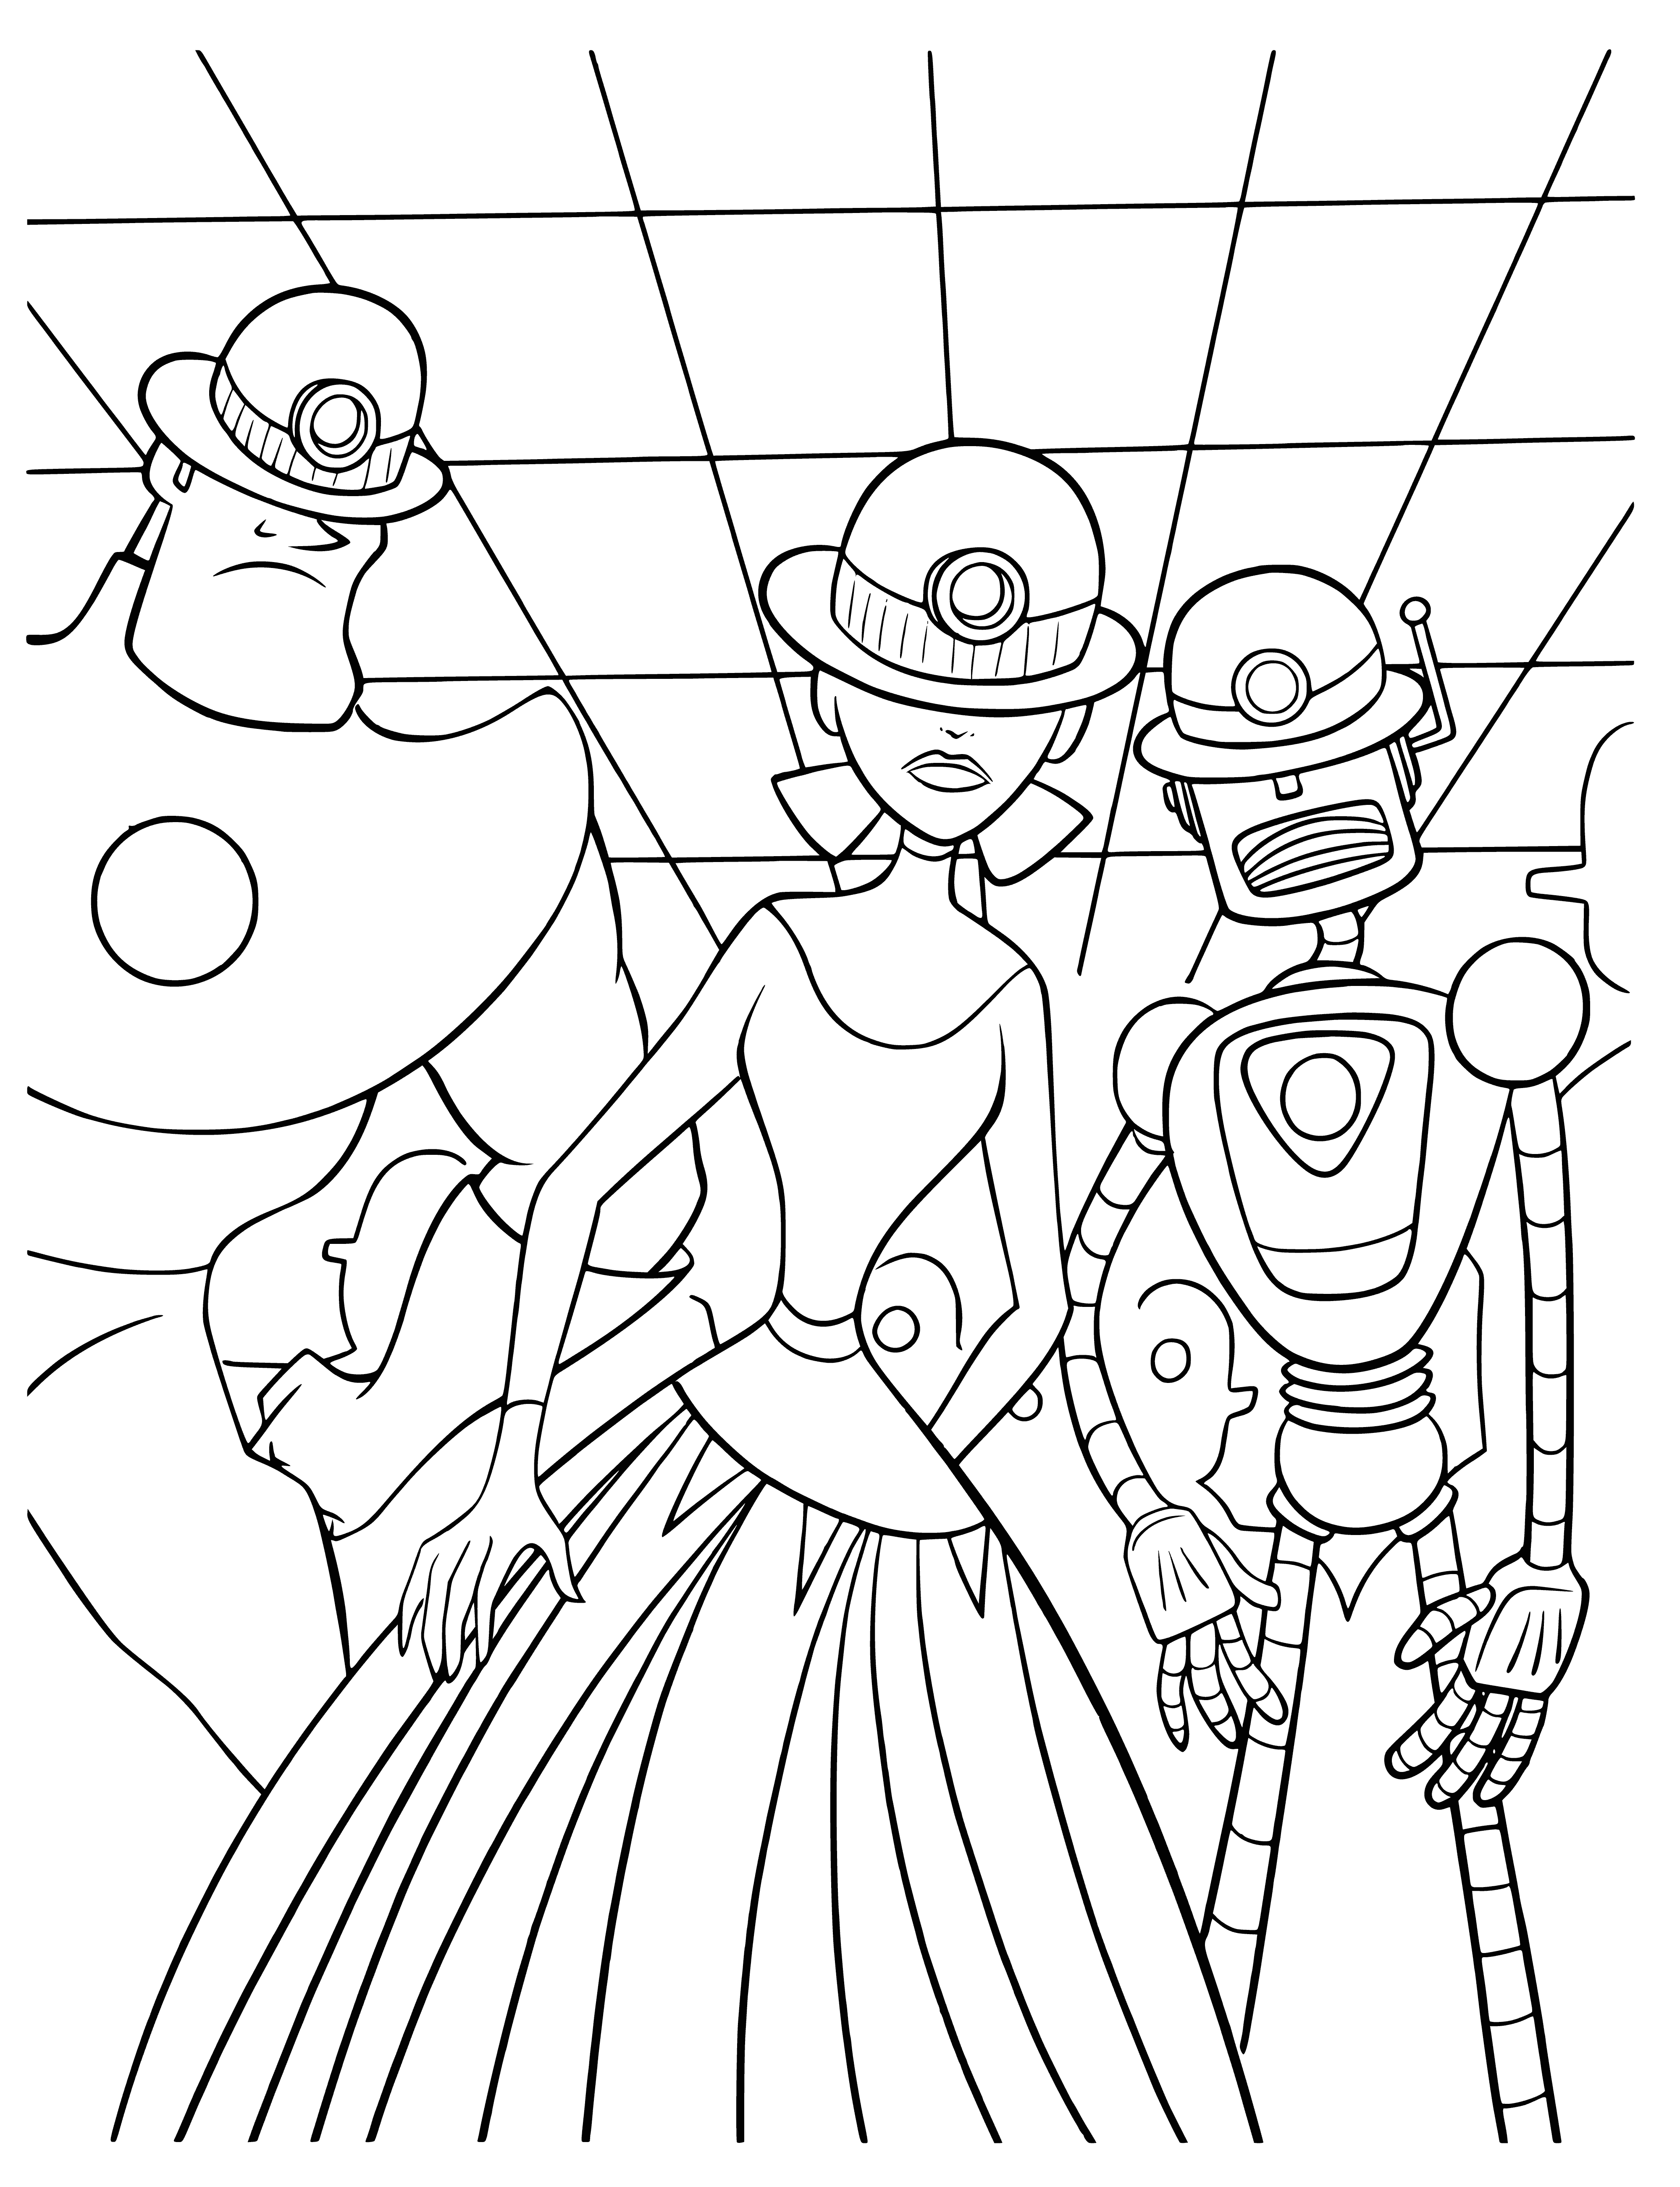 Trinity coloring page